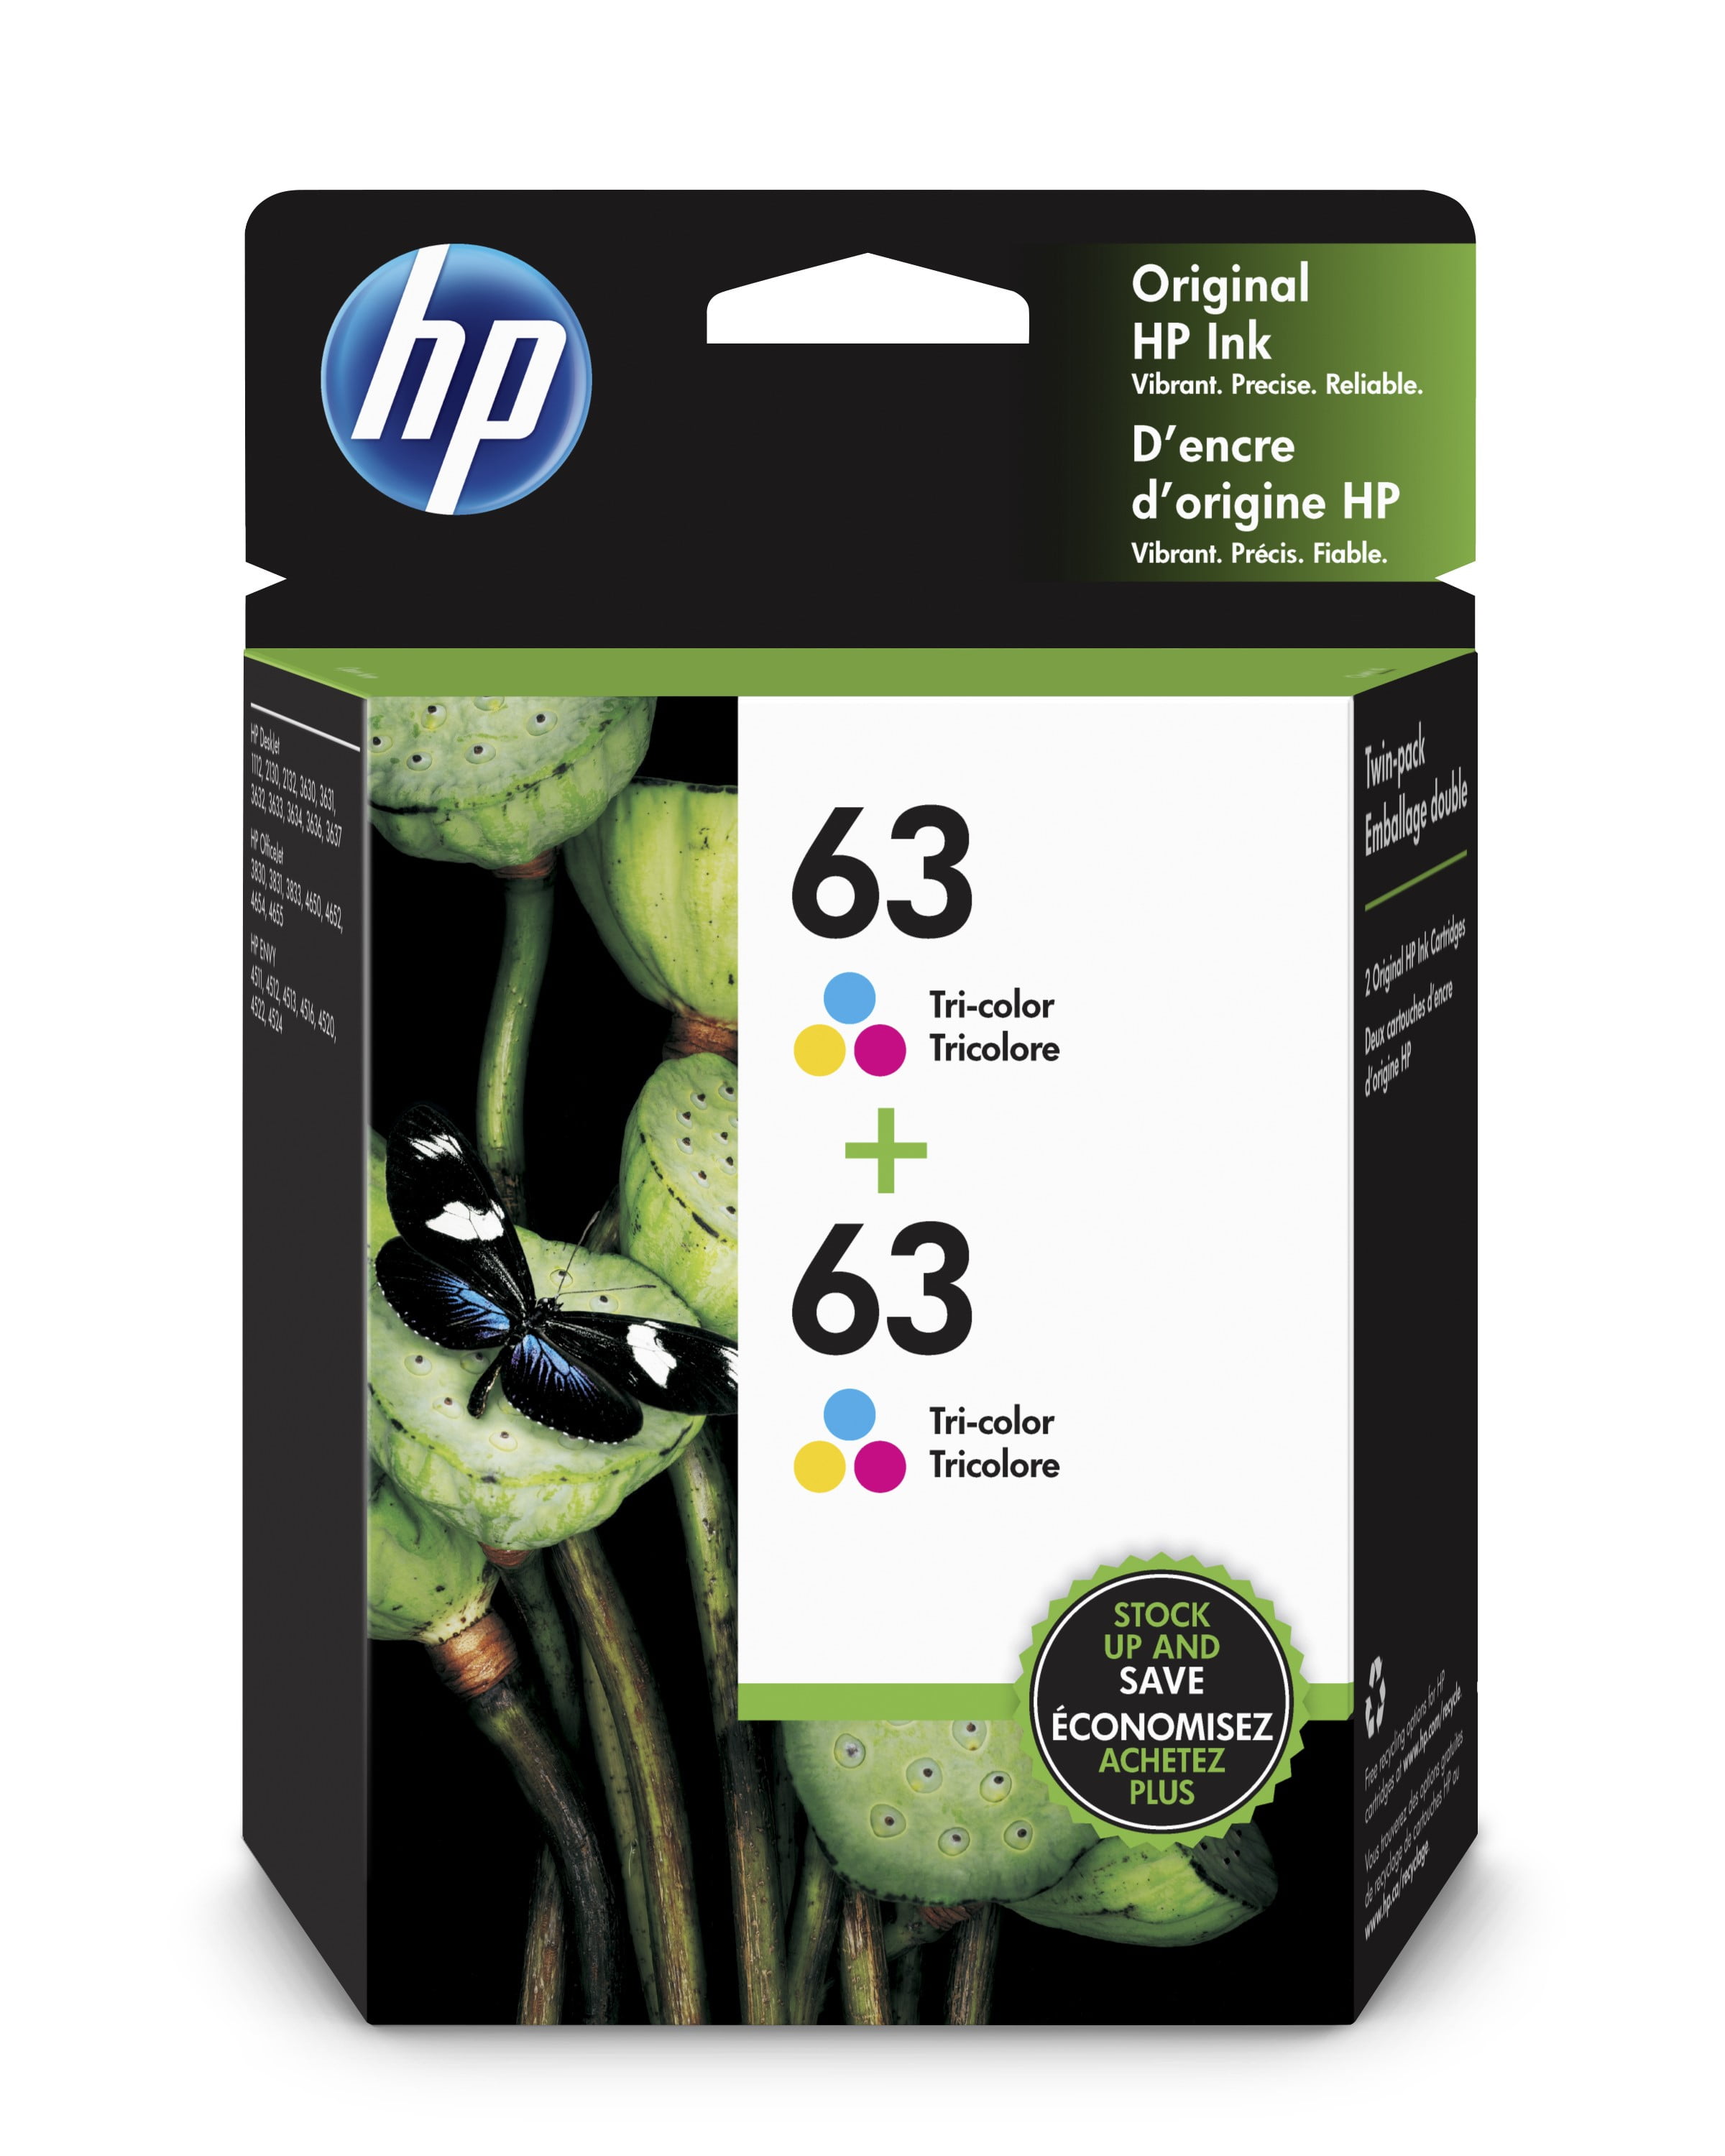 Hp 302 Ink Compatibility Chart